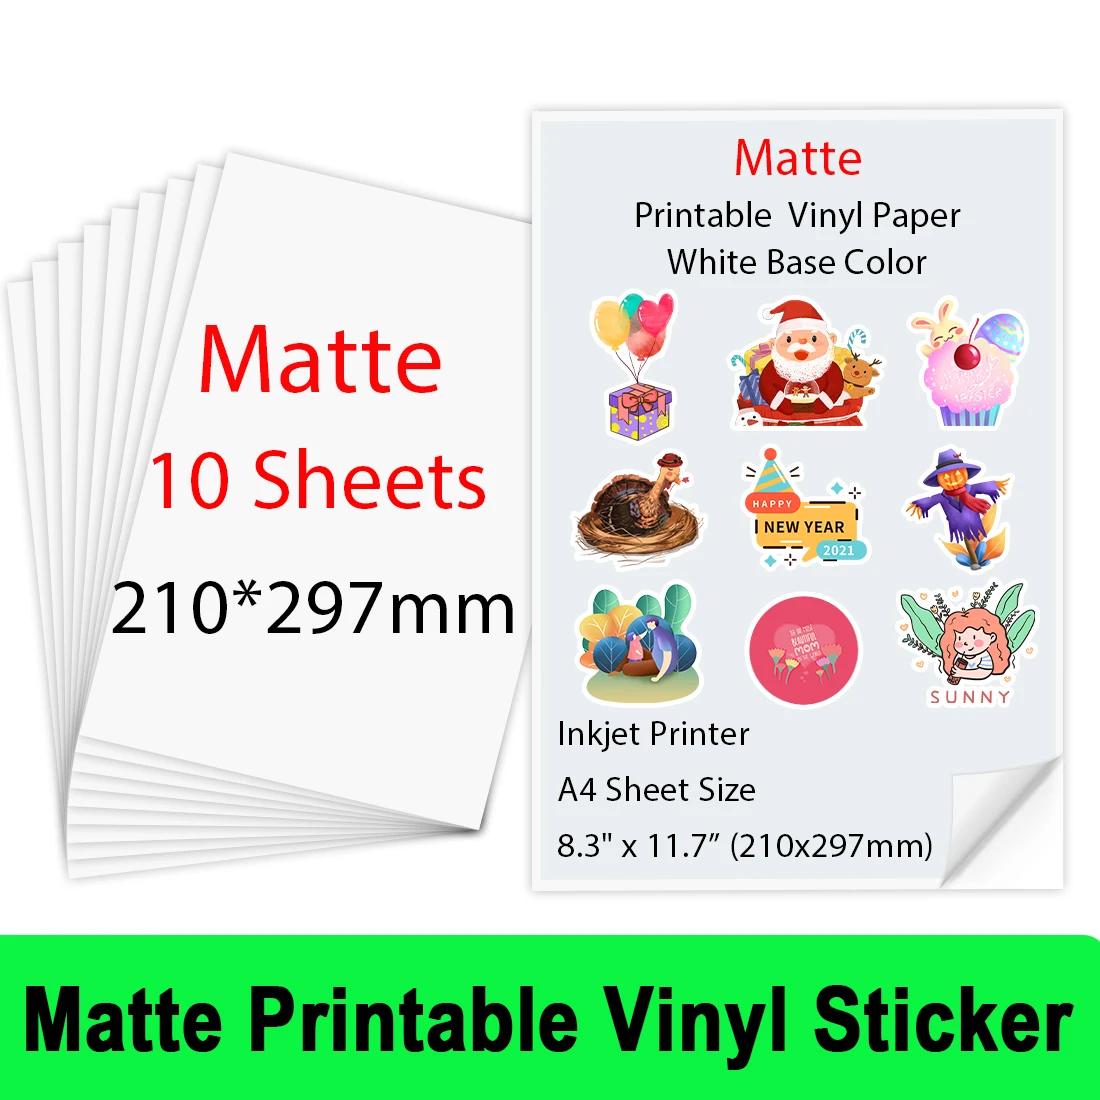 10 Sheets Printable Vinyl Sticker Paper A4 Glossy Matte Self-adhesive Waterproof Copy Paper for Inkjet printer DIY Crafts Gifts